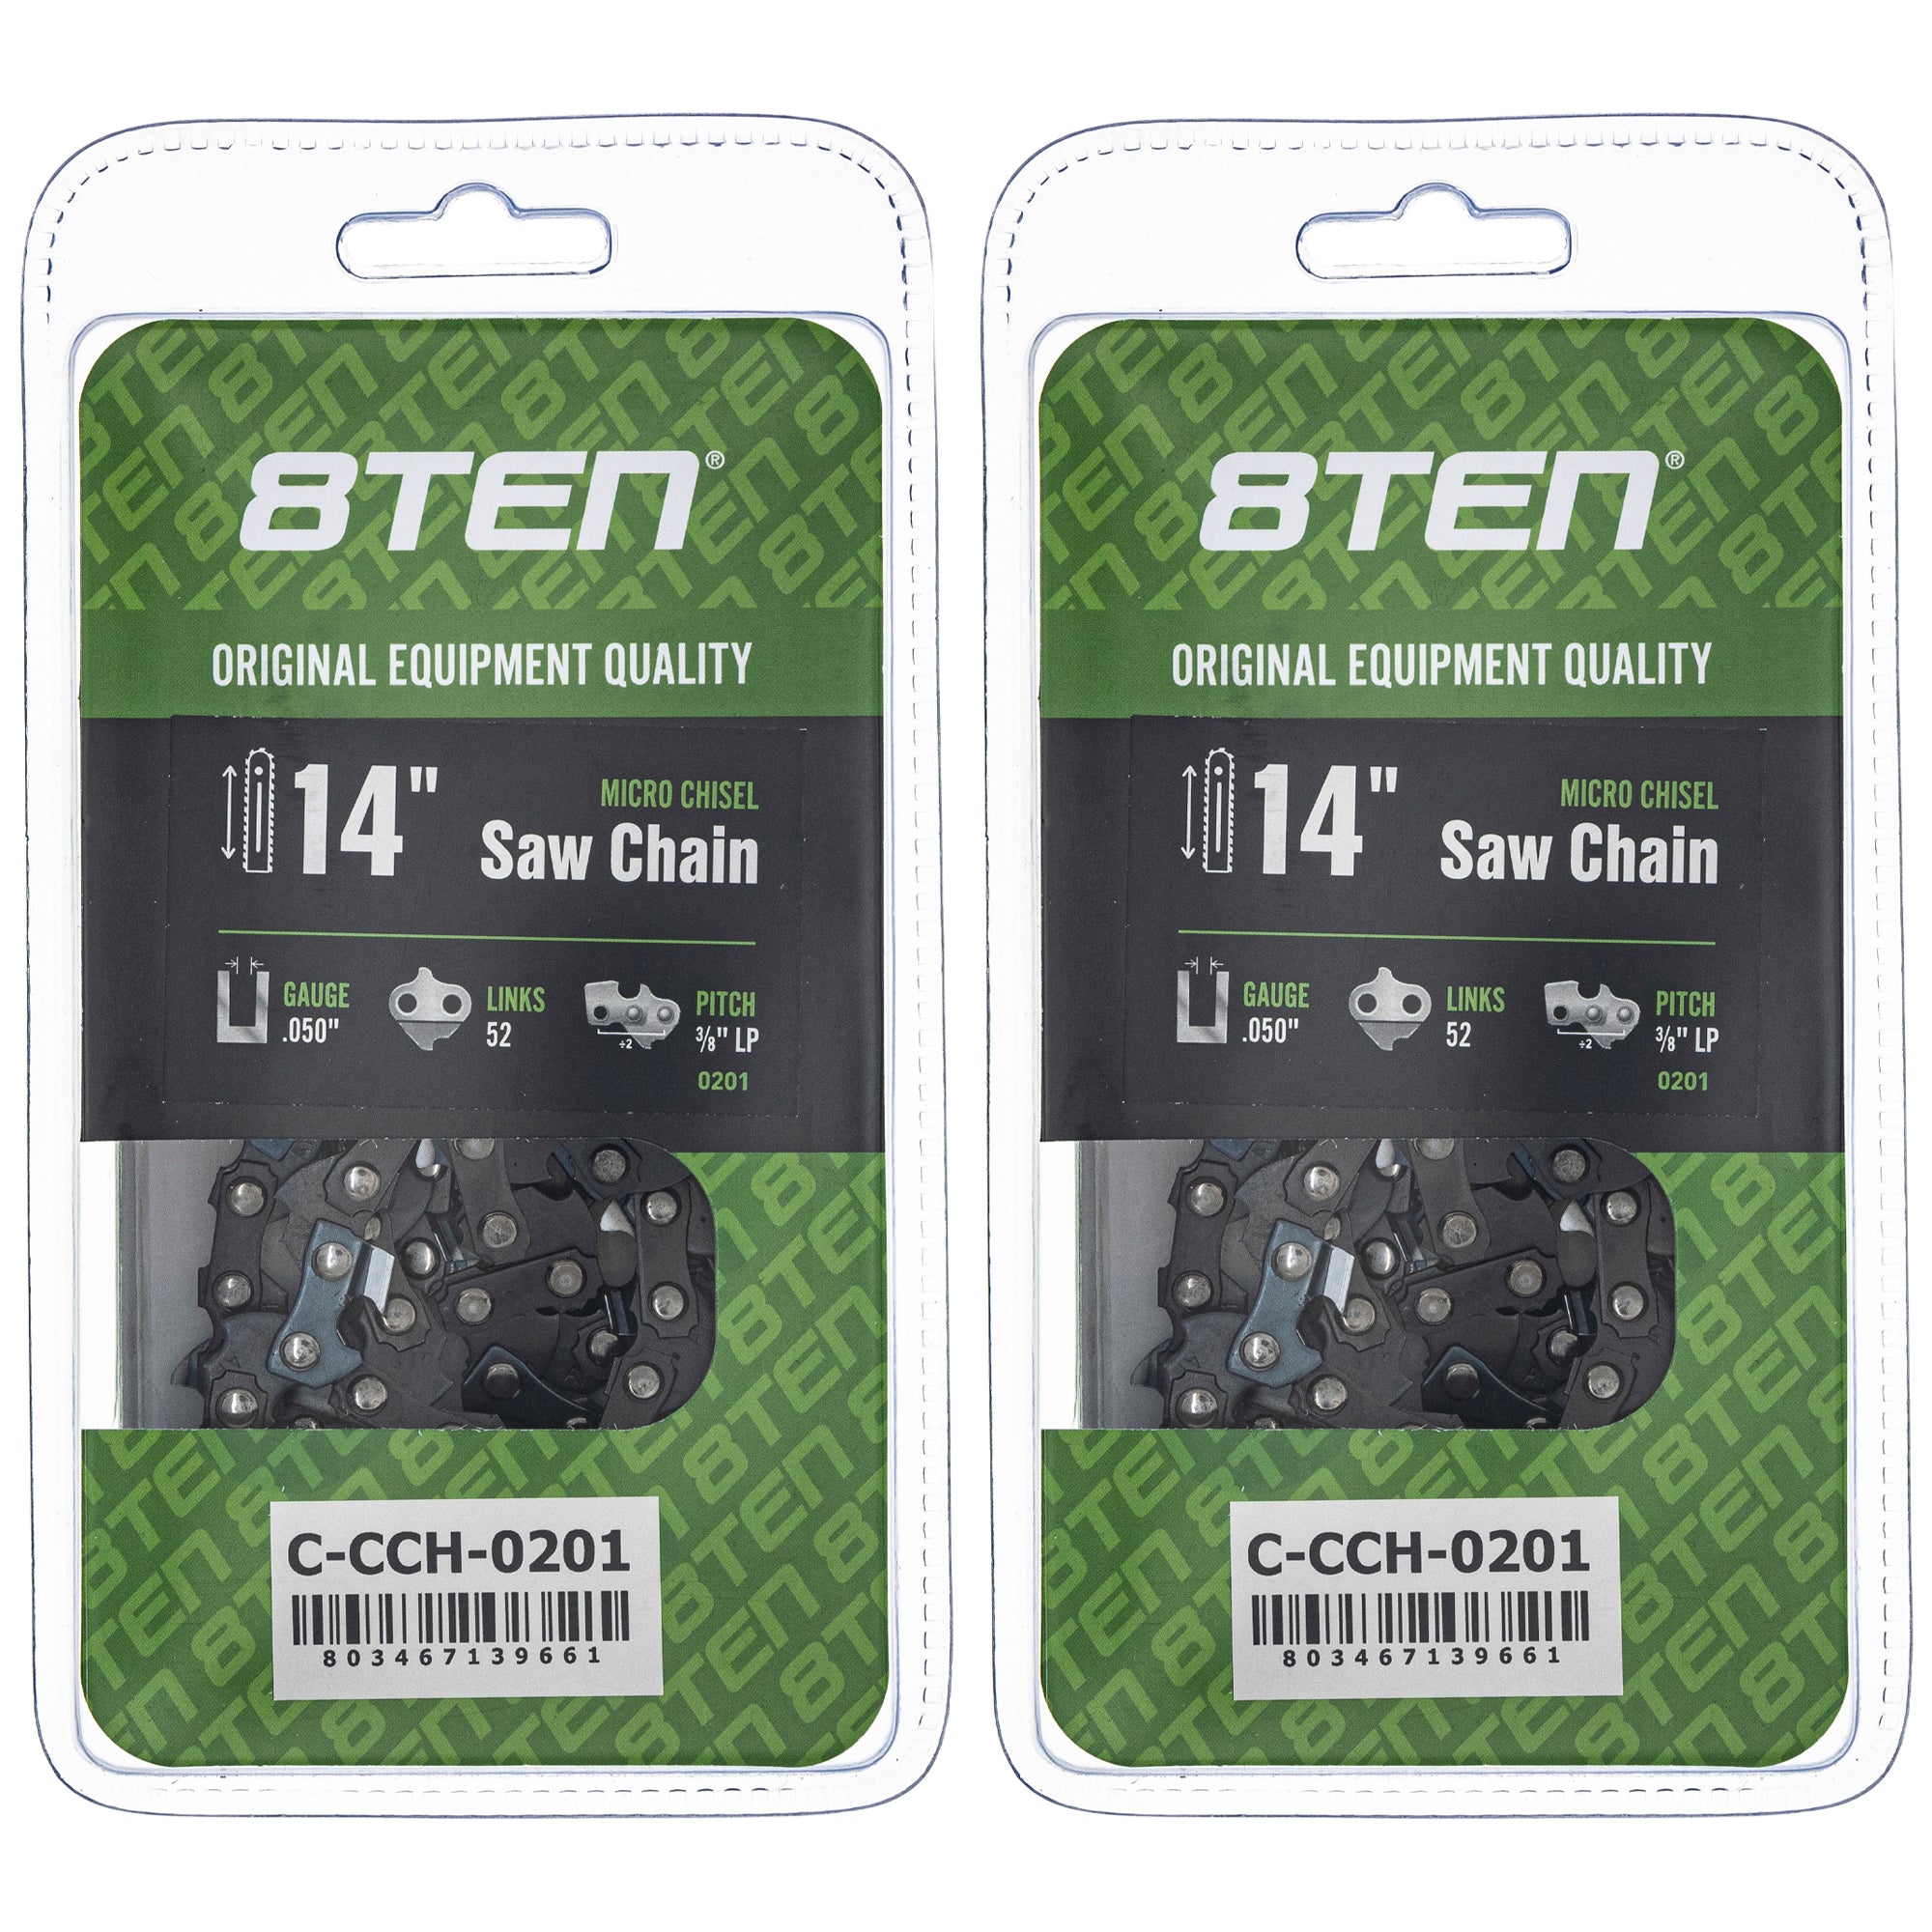 Chainsaw Chain 14 Inch .050 3/8 LP 52DL 2-Pack for zOTHER Stens Oregon Ref. Oregon 8TEN 810-CCC2423H